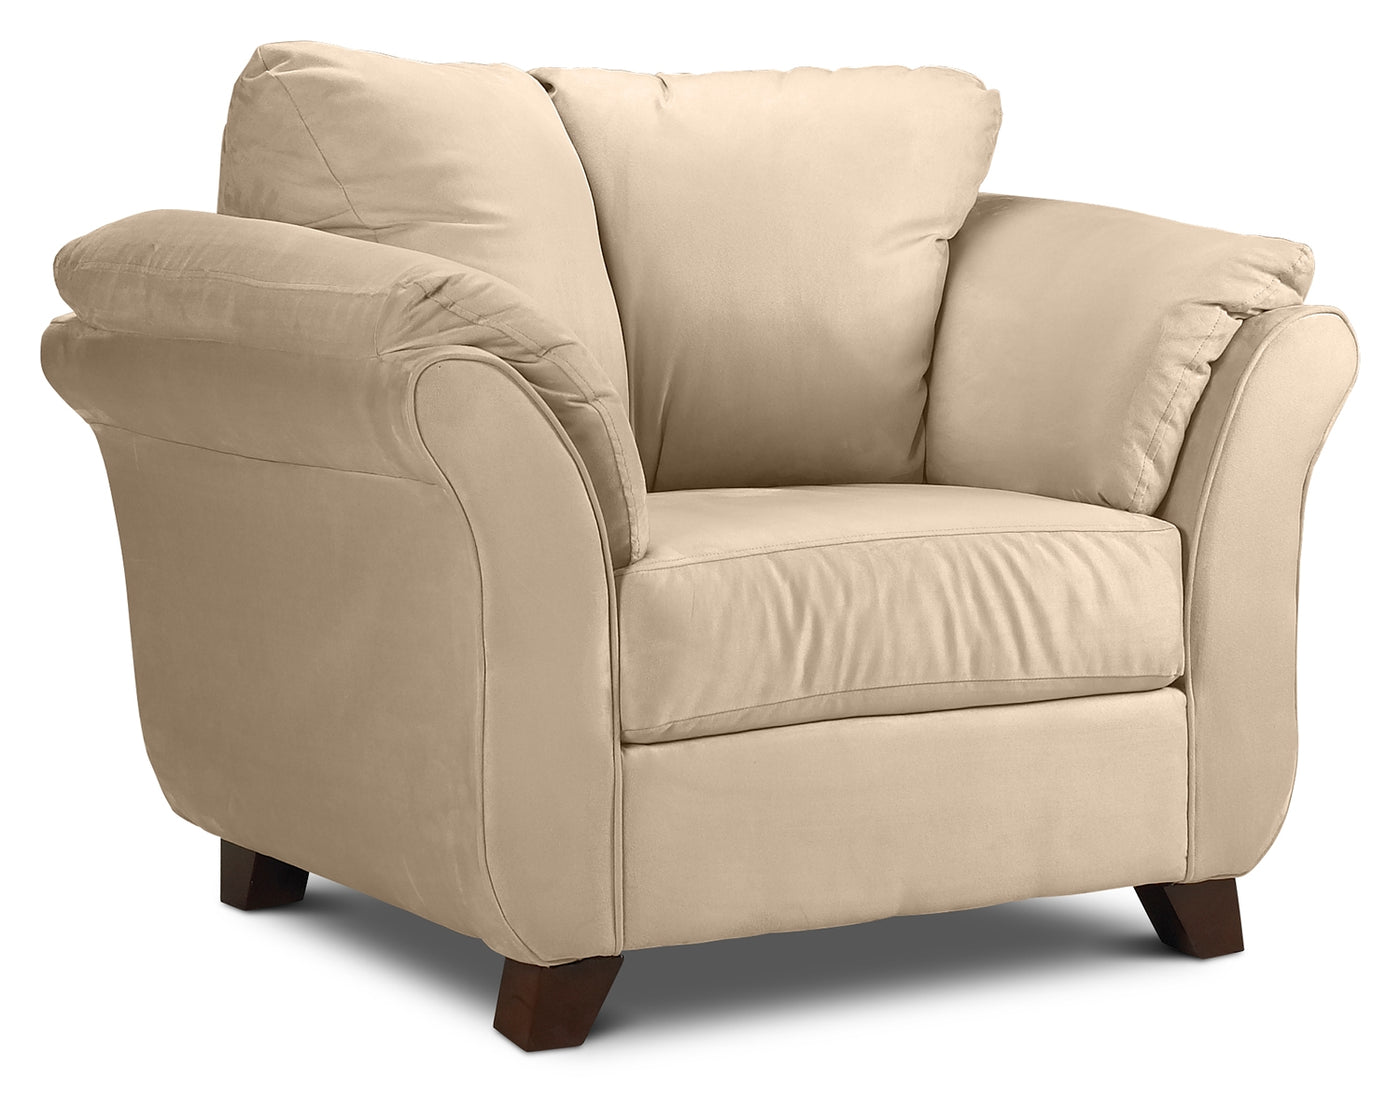 Collier Sofa and Chair Set - Beige